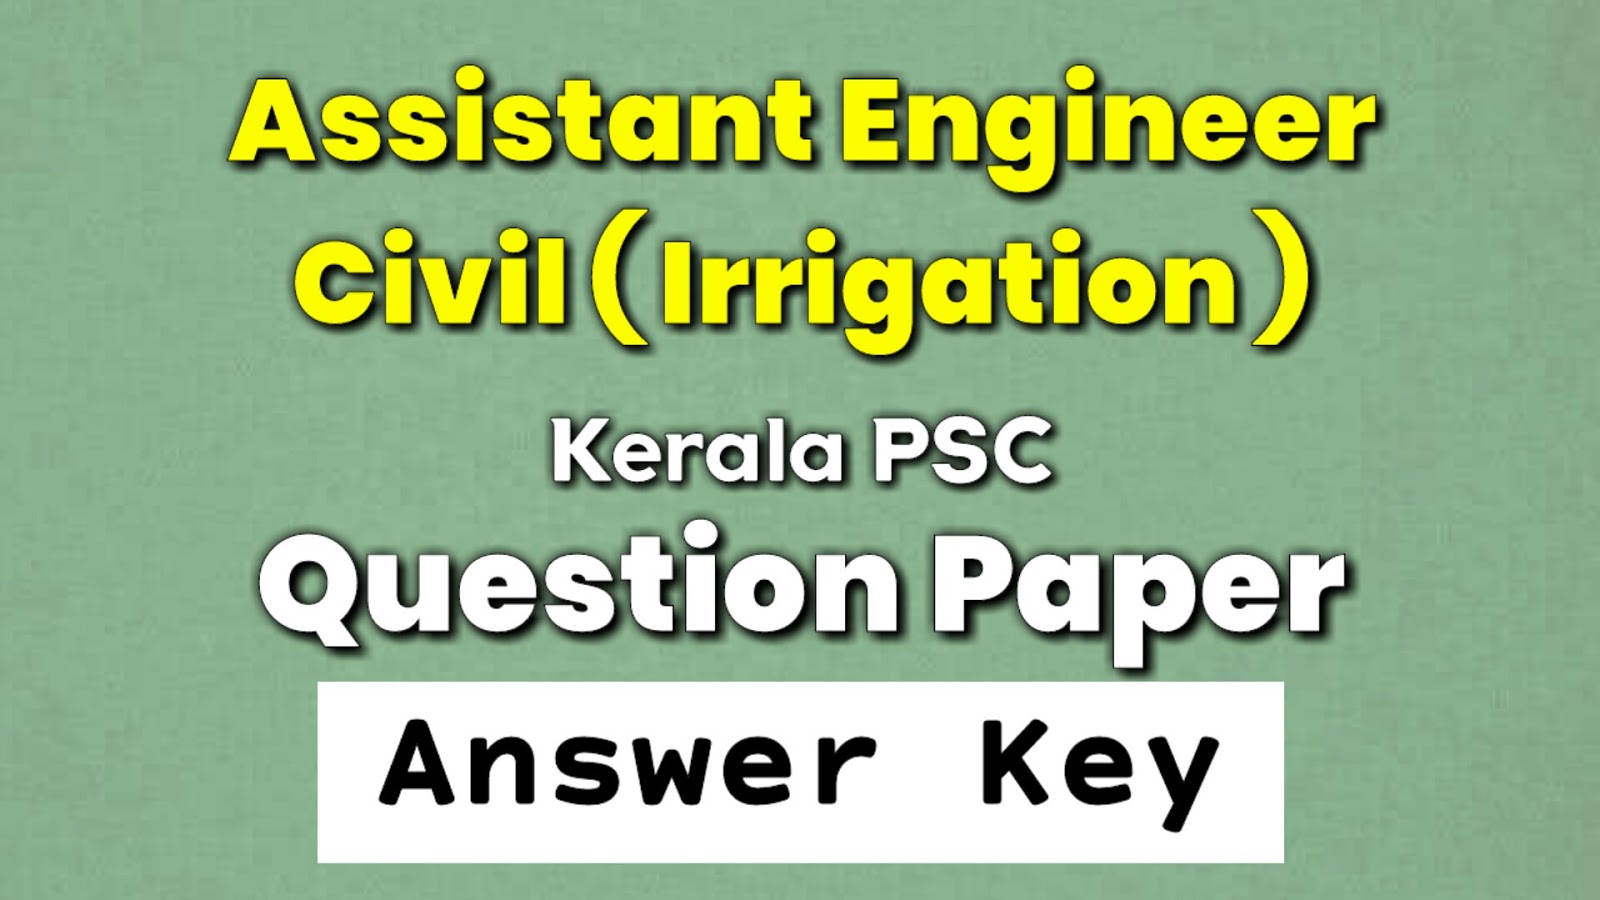 kerala-psc-assistant-engineer-civil-irrigation-exam-answer-key-26-02-2020-category-no-083